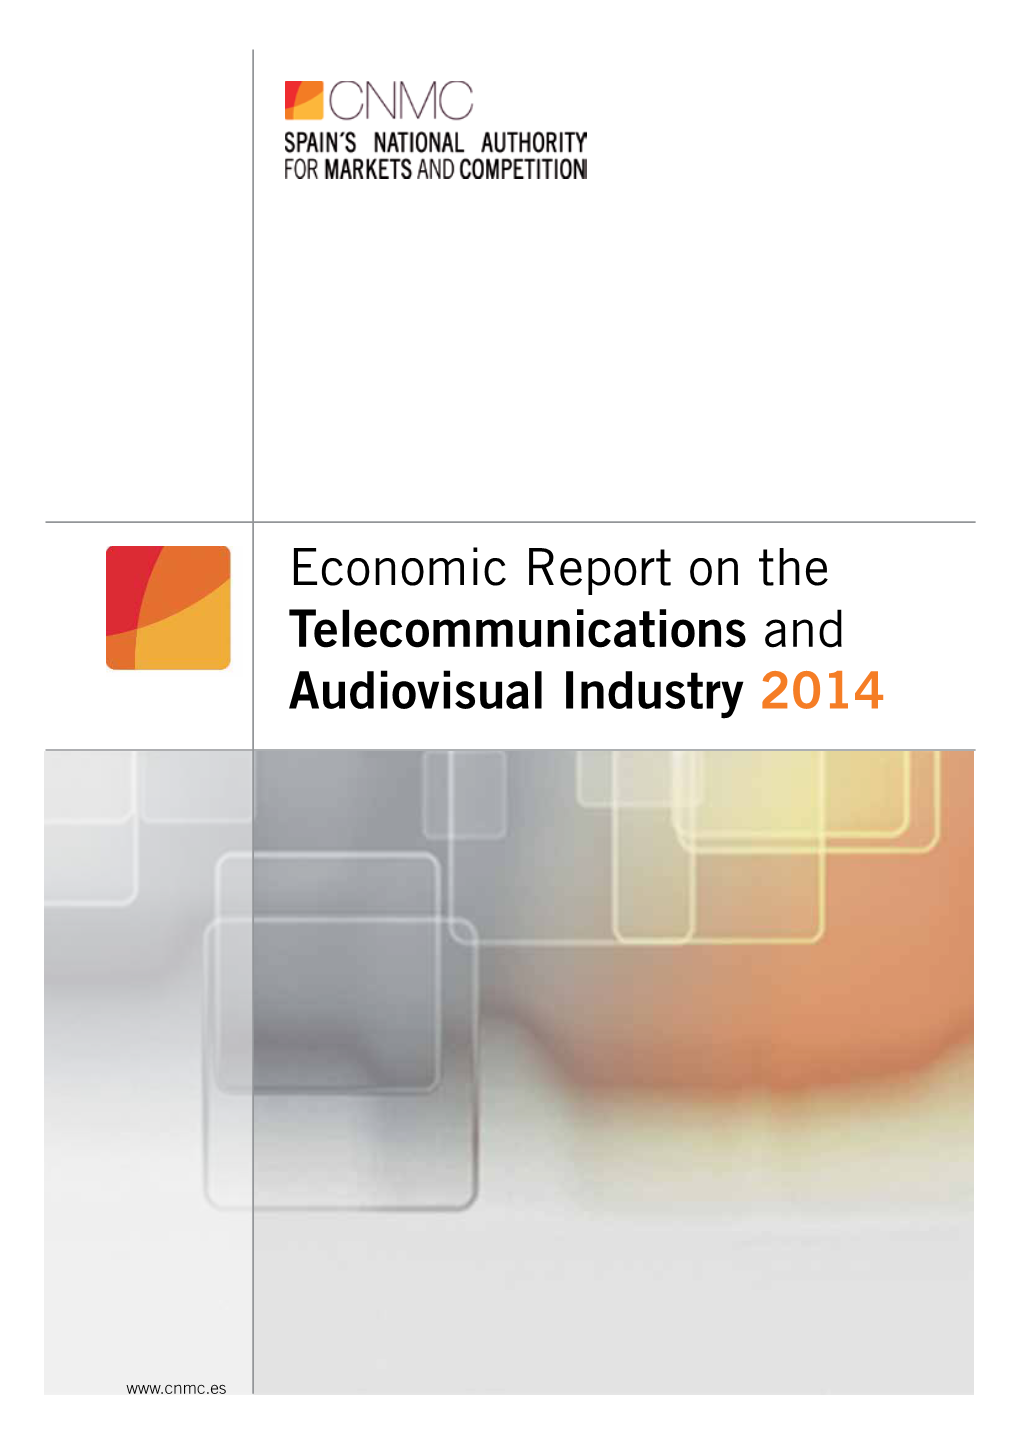 Economic Report on the Telecommunications and Audiovisual Industry 2014